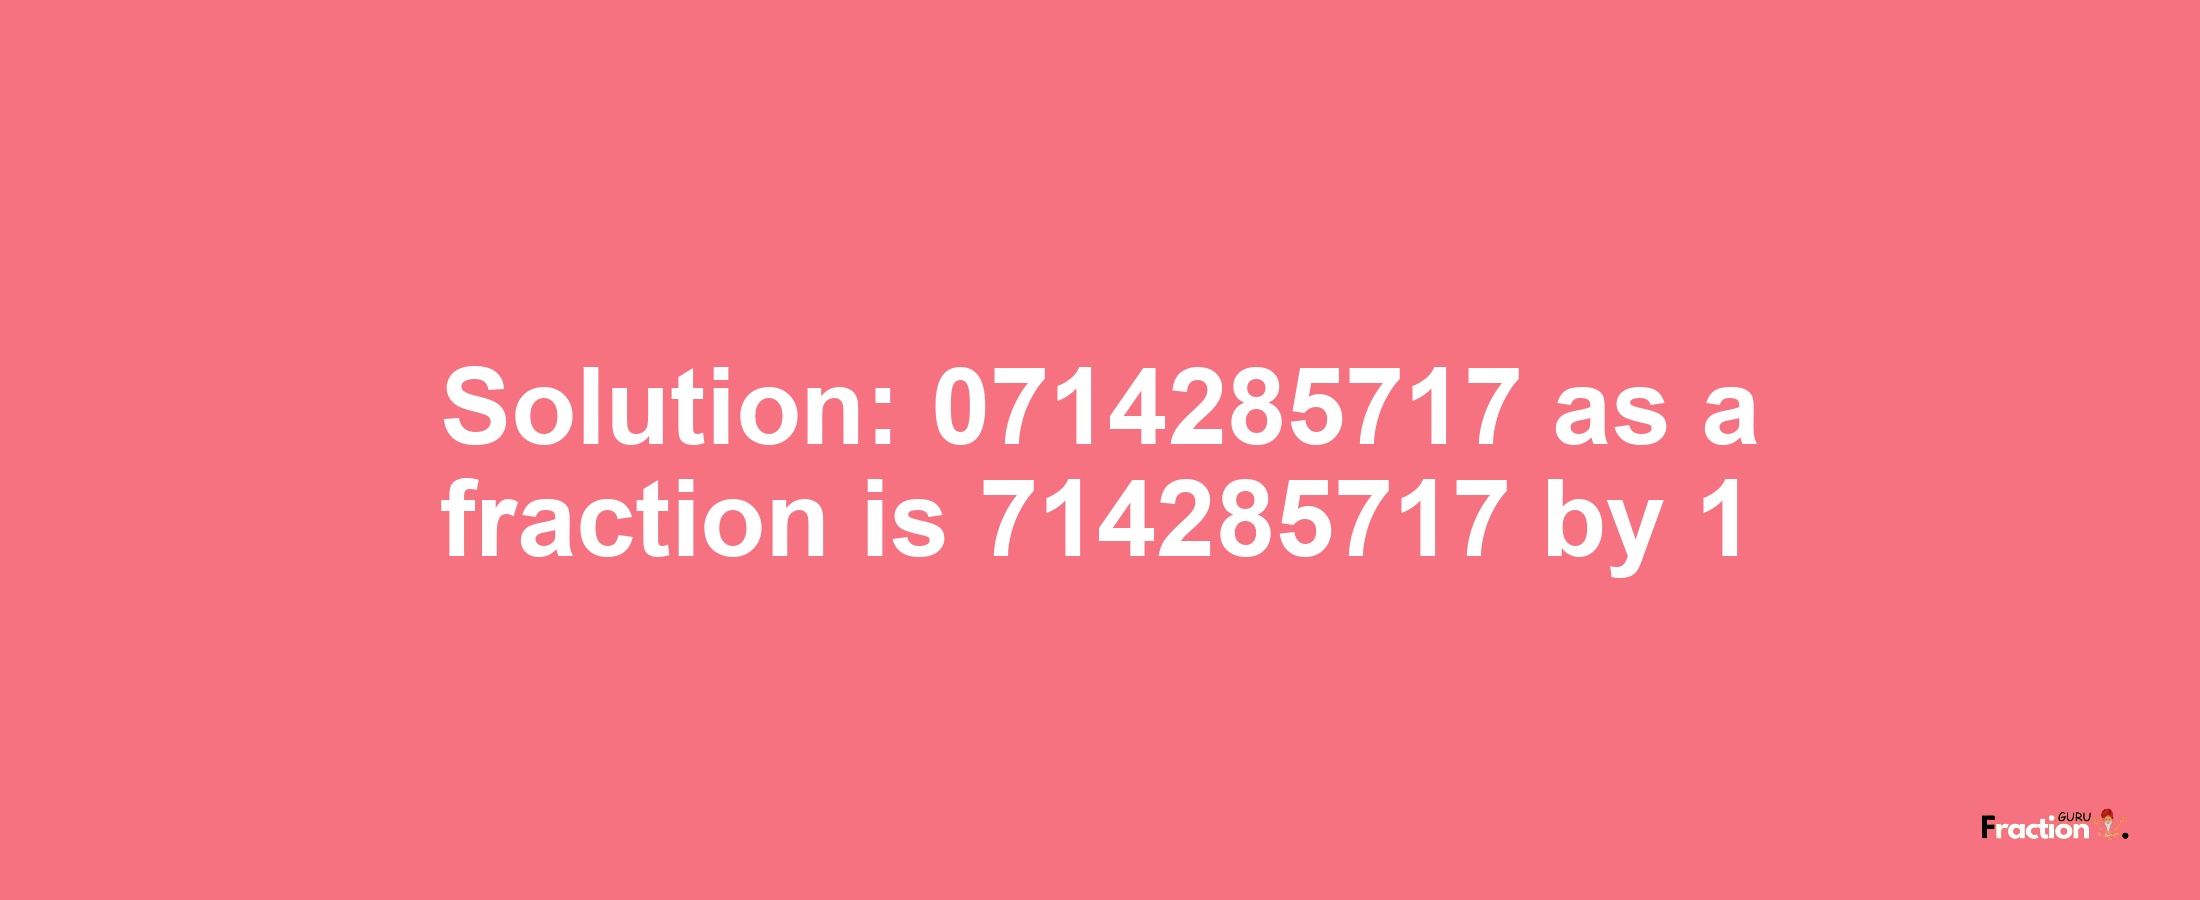 Solution:0714285717 as a fraction is 714285717/1